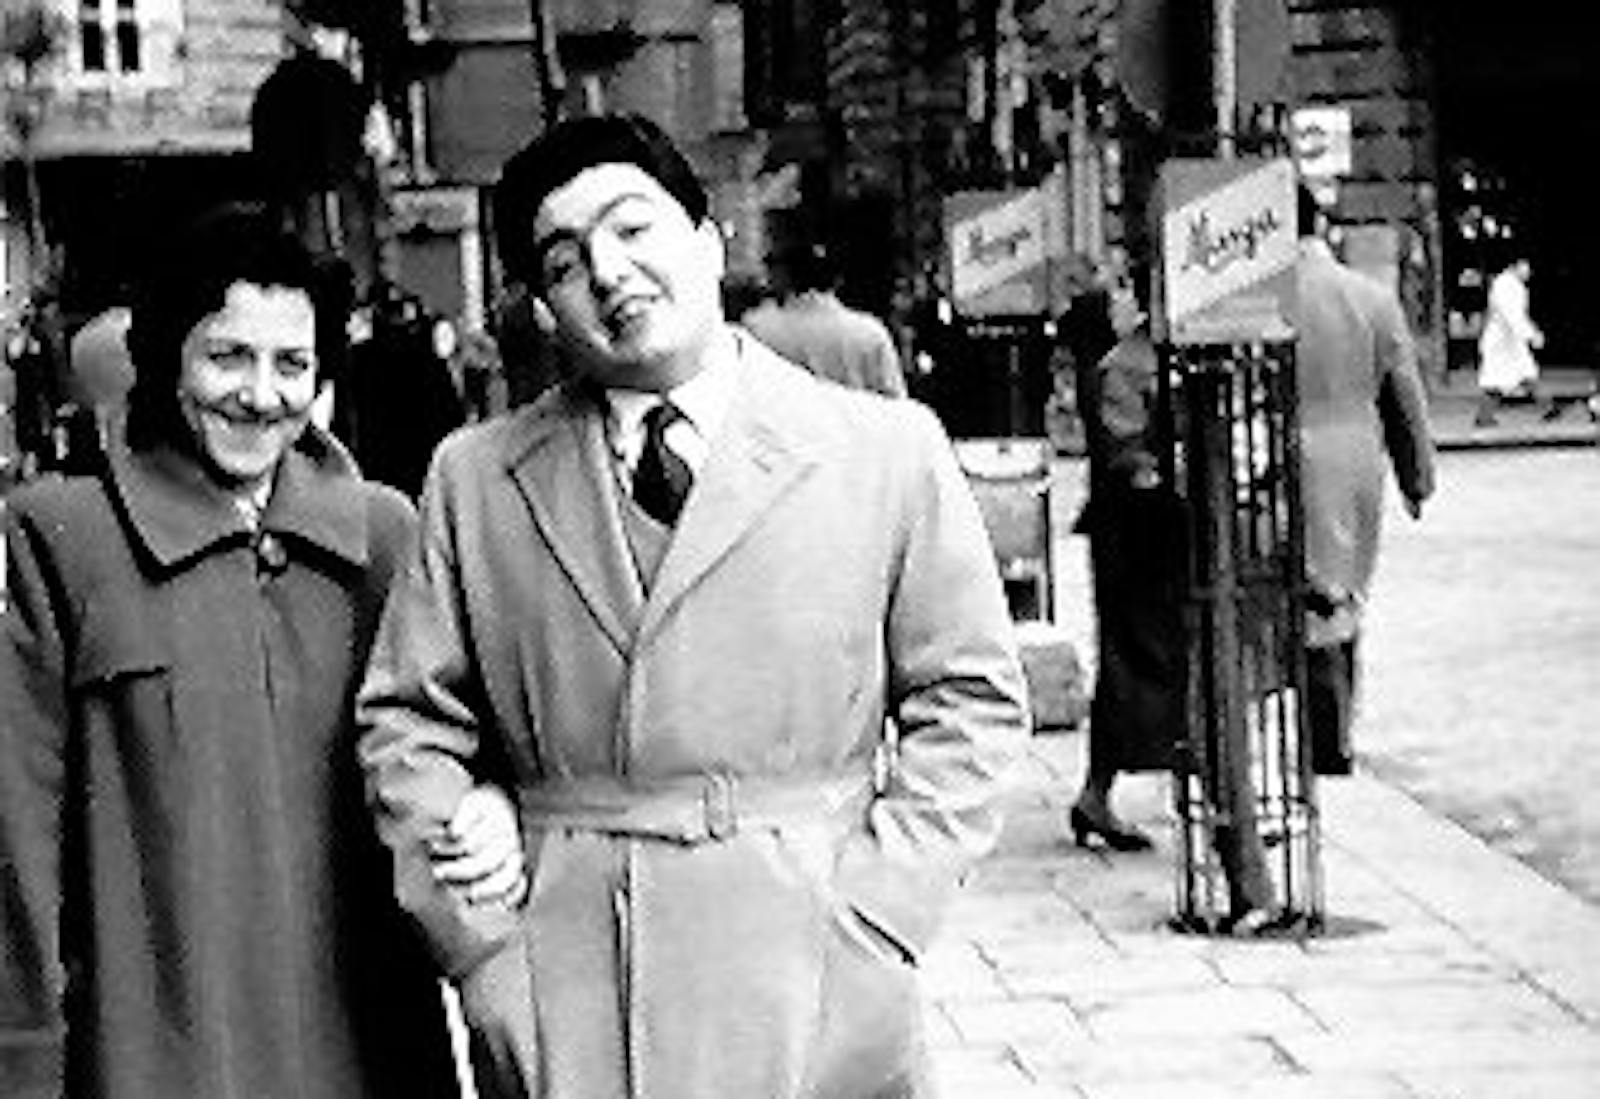 Italo’s parents, Silvana and Enzo, in Rome in 1950.